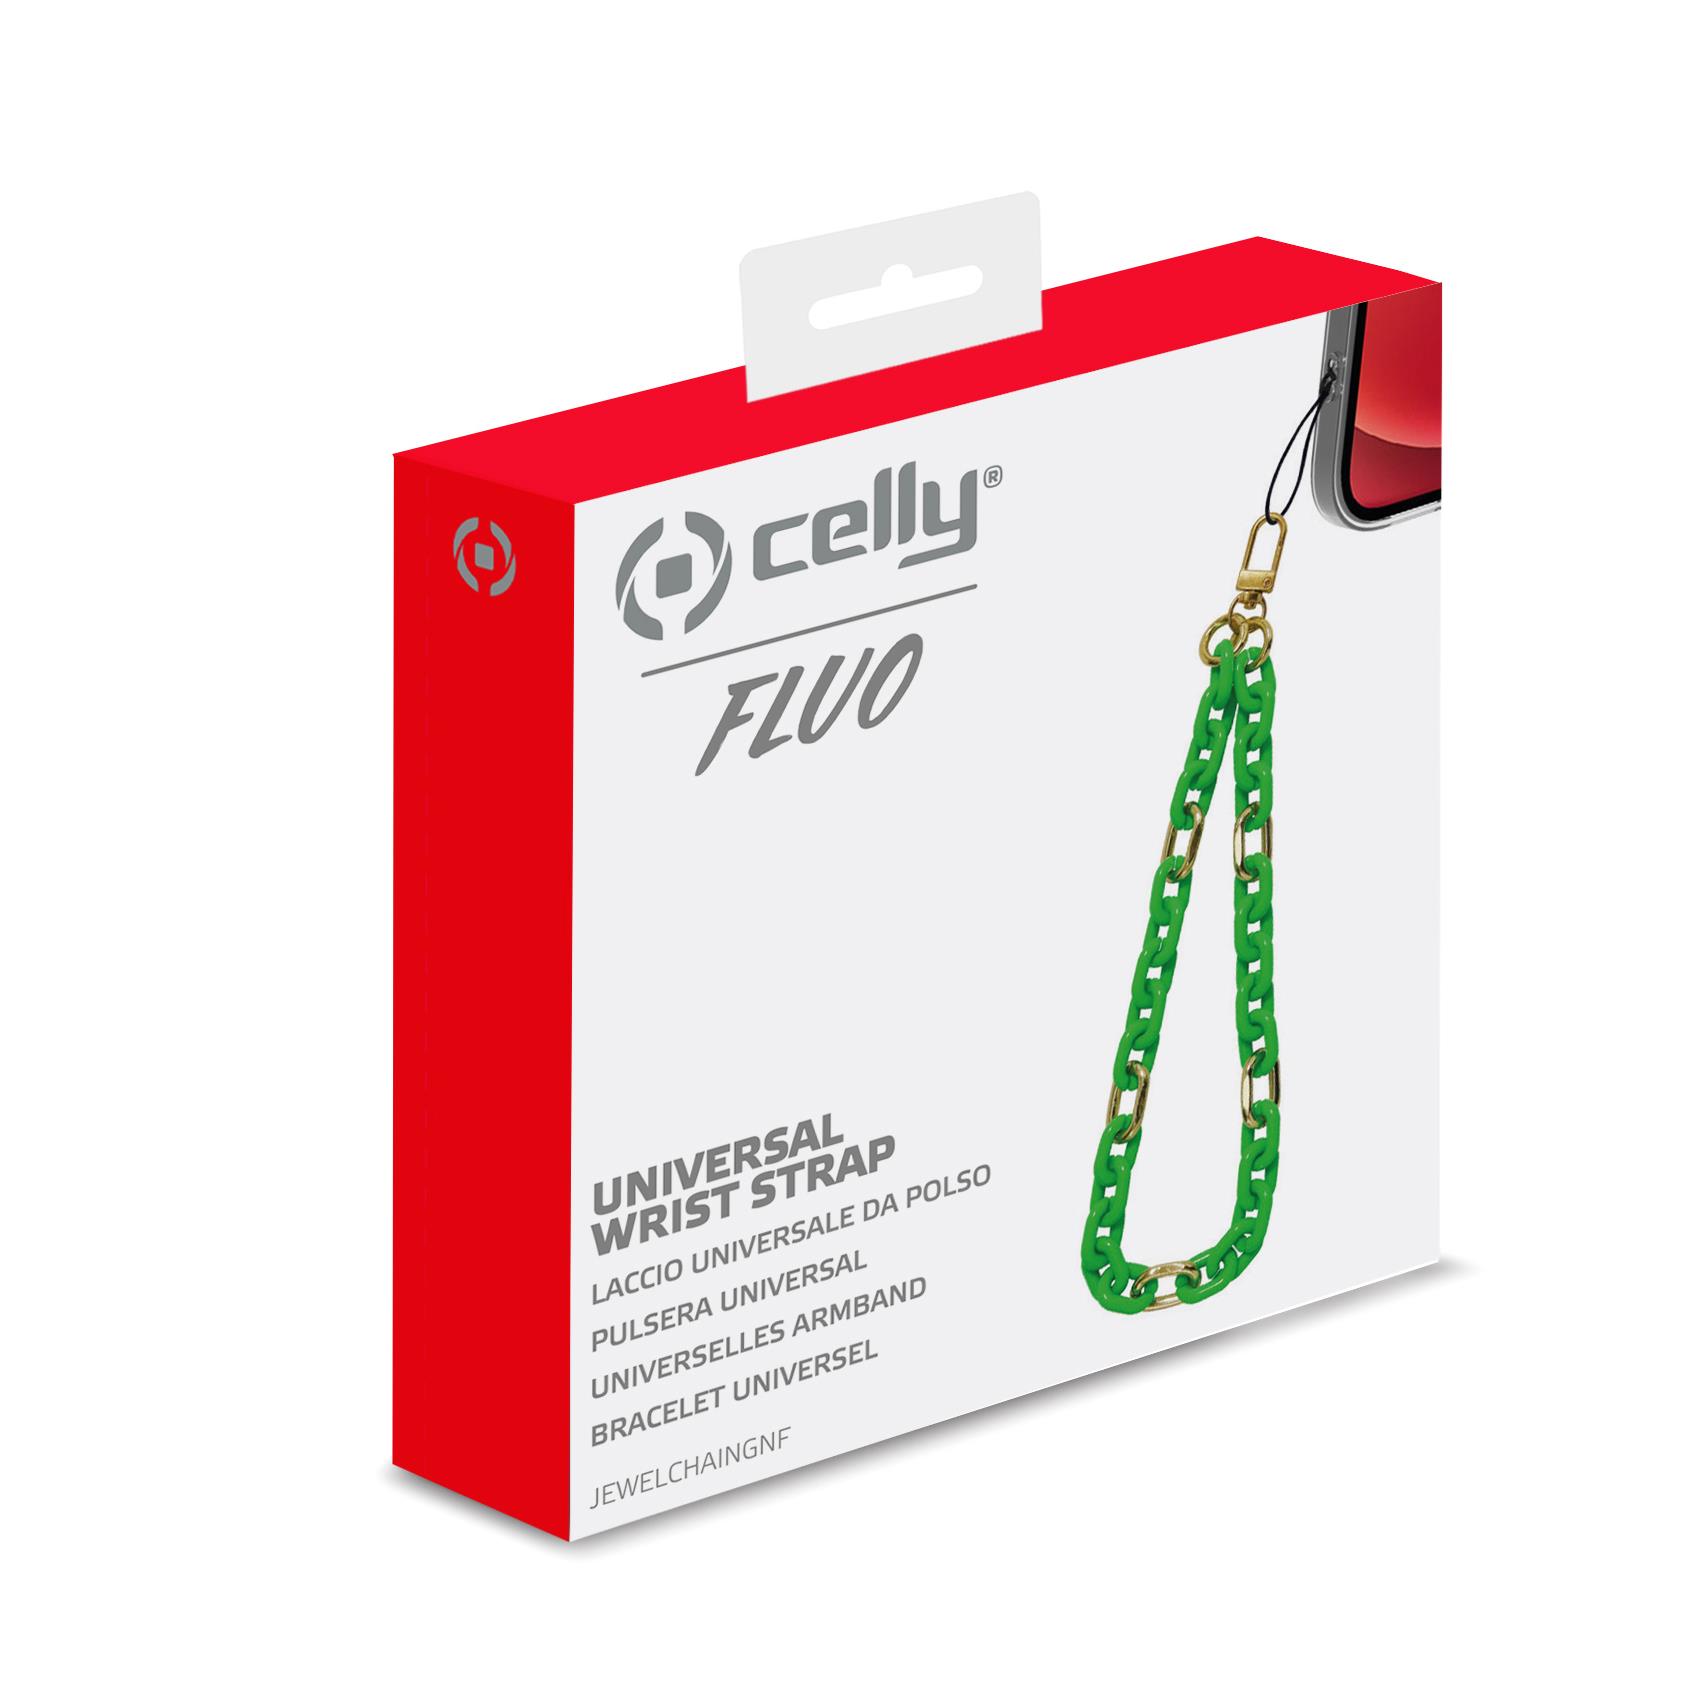 Jewel Chain Green Fluo Celly Jewelchaingnf 8021735195603